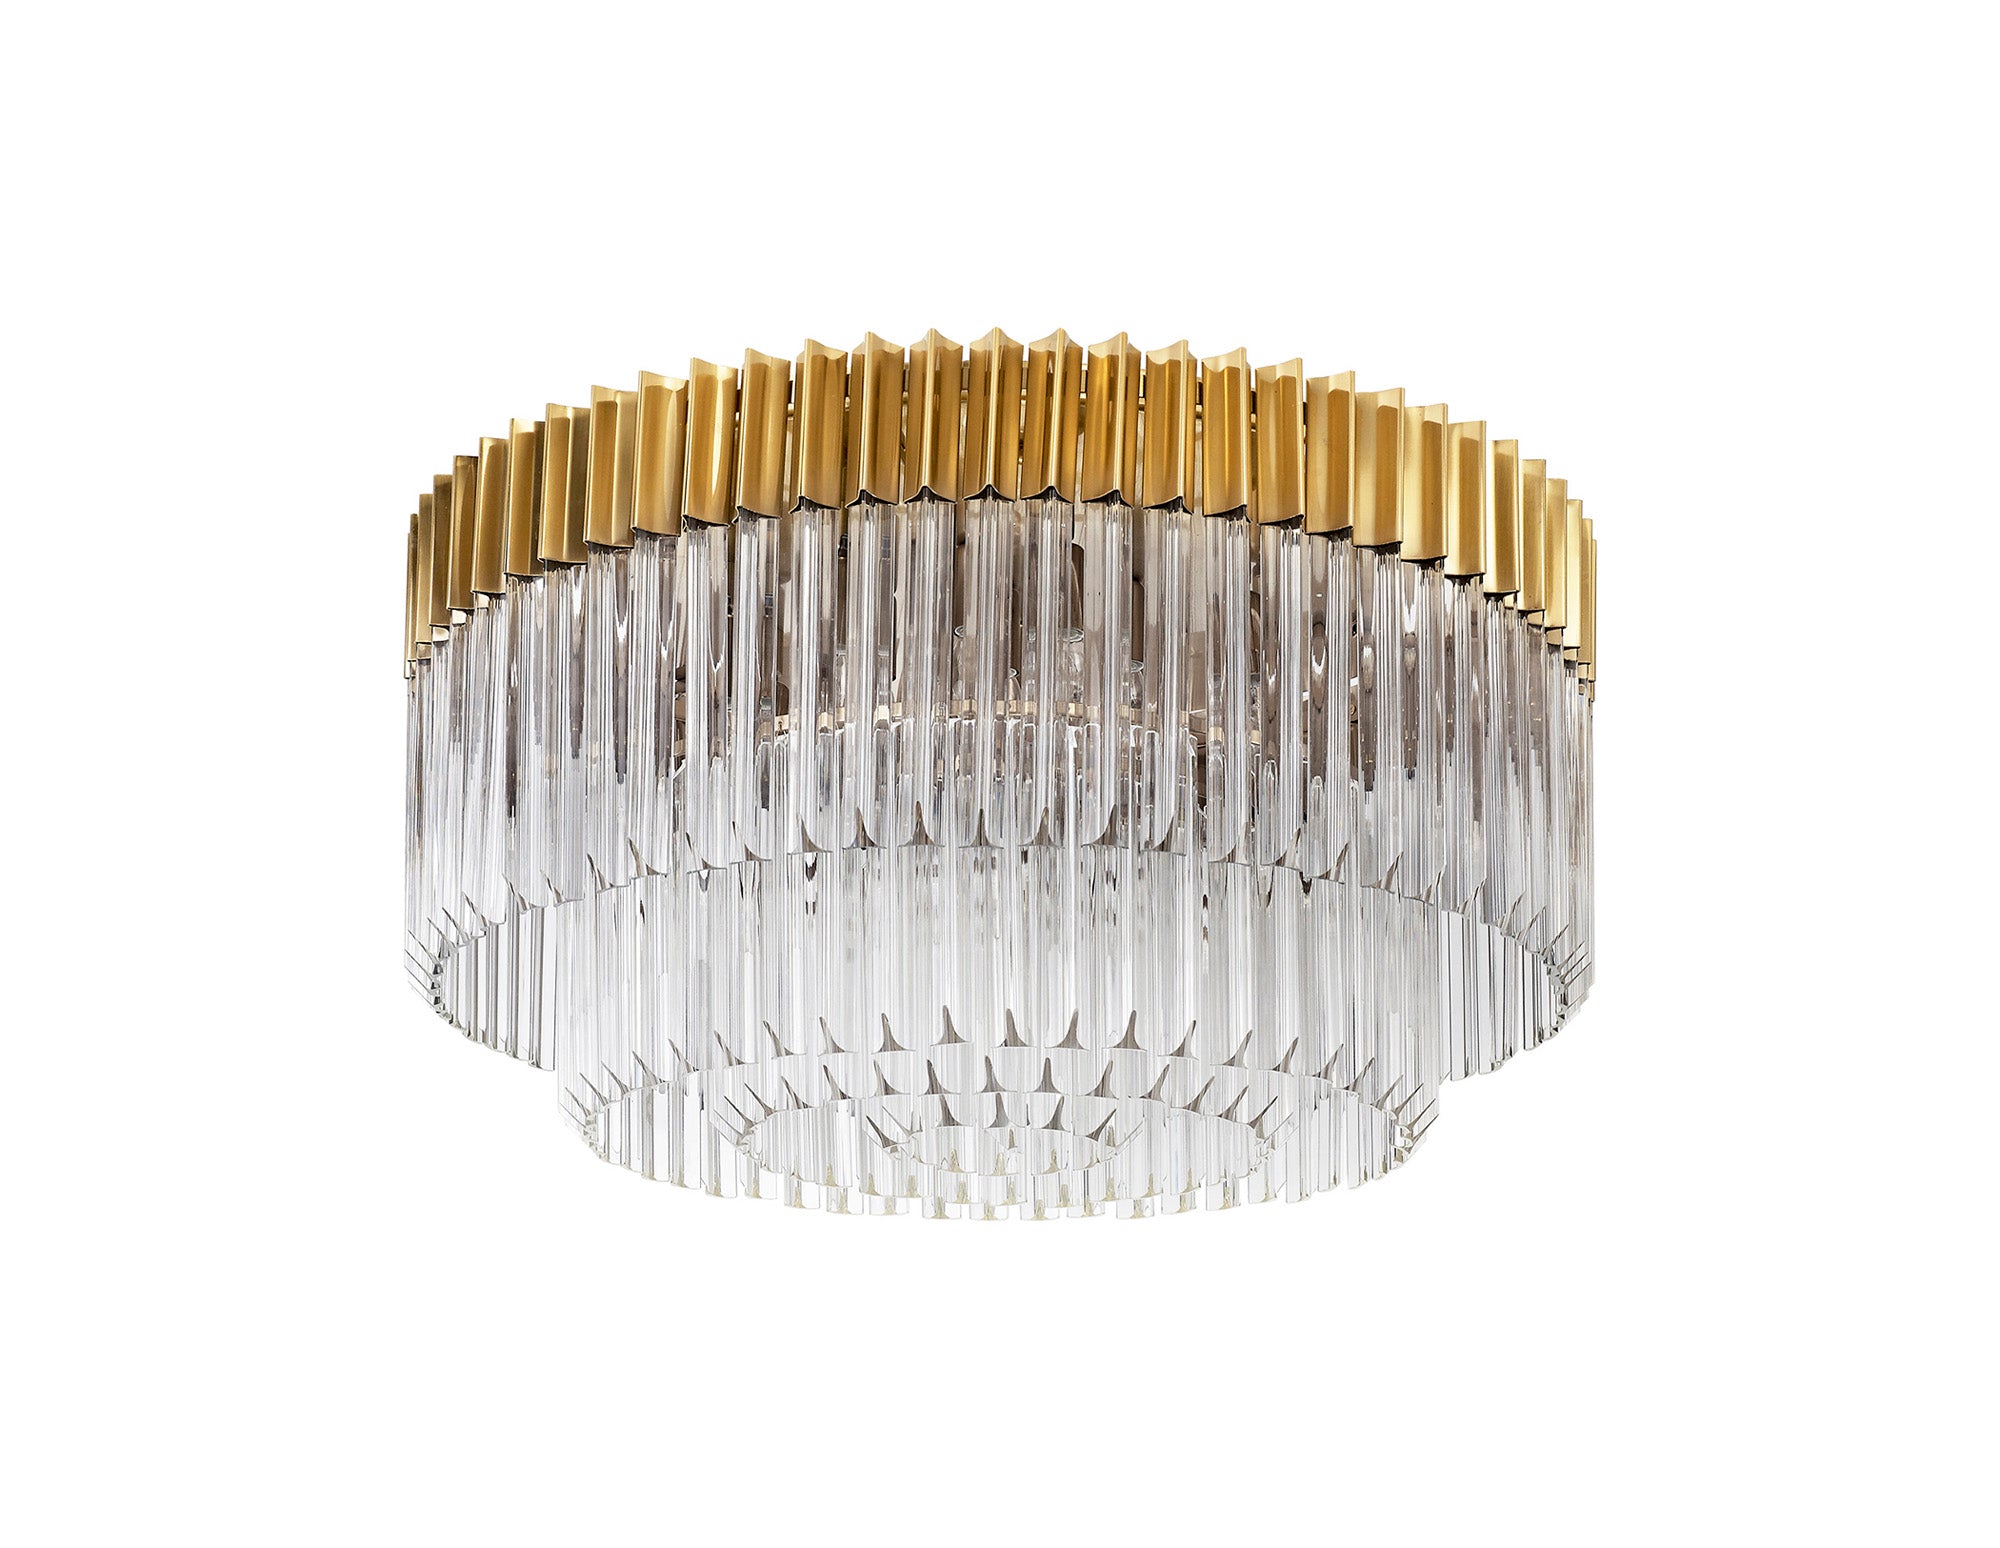 Knightsbridge Ceiling Round 12 Light E14, Brass/Clear Glass, Item Weight: 28.4kg - LO182293